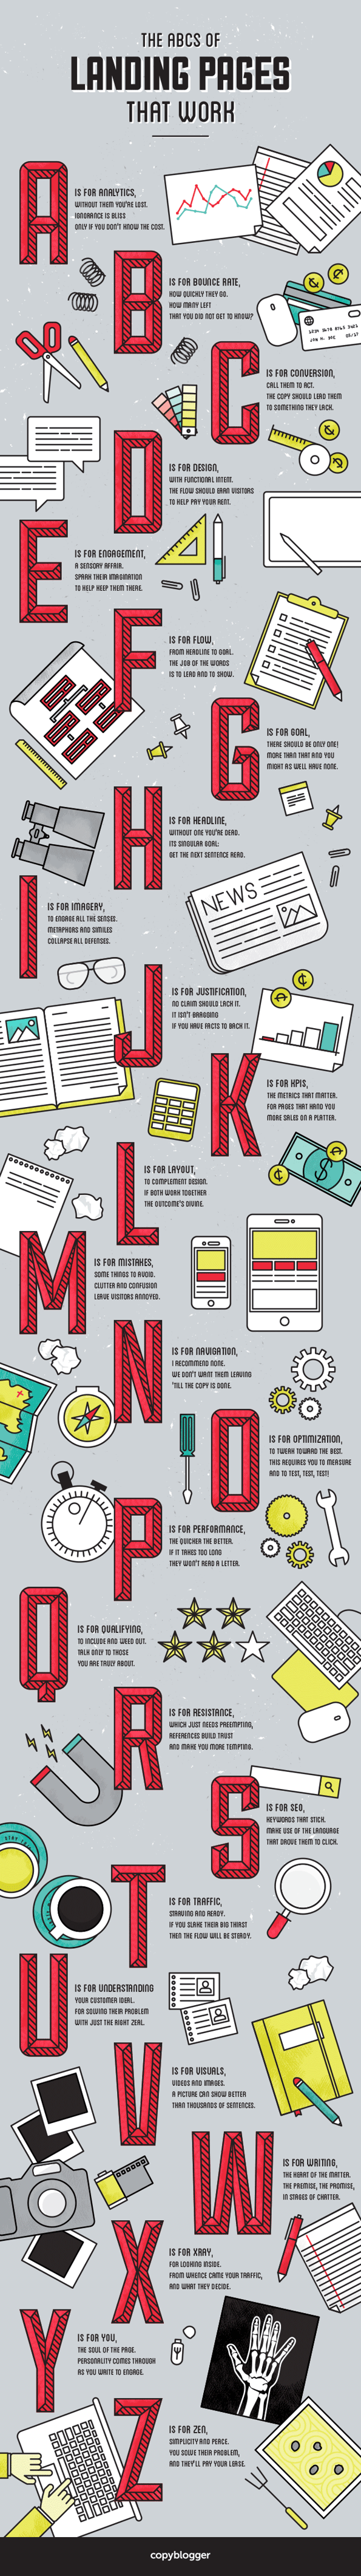 the-abcs-of-effective-landing-pages-infographic-image